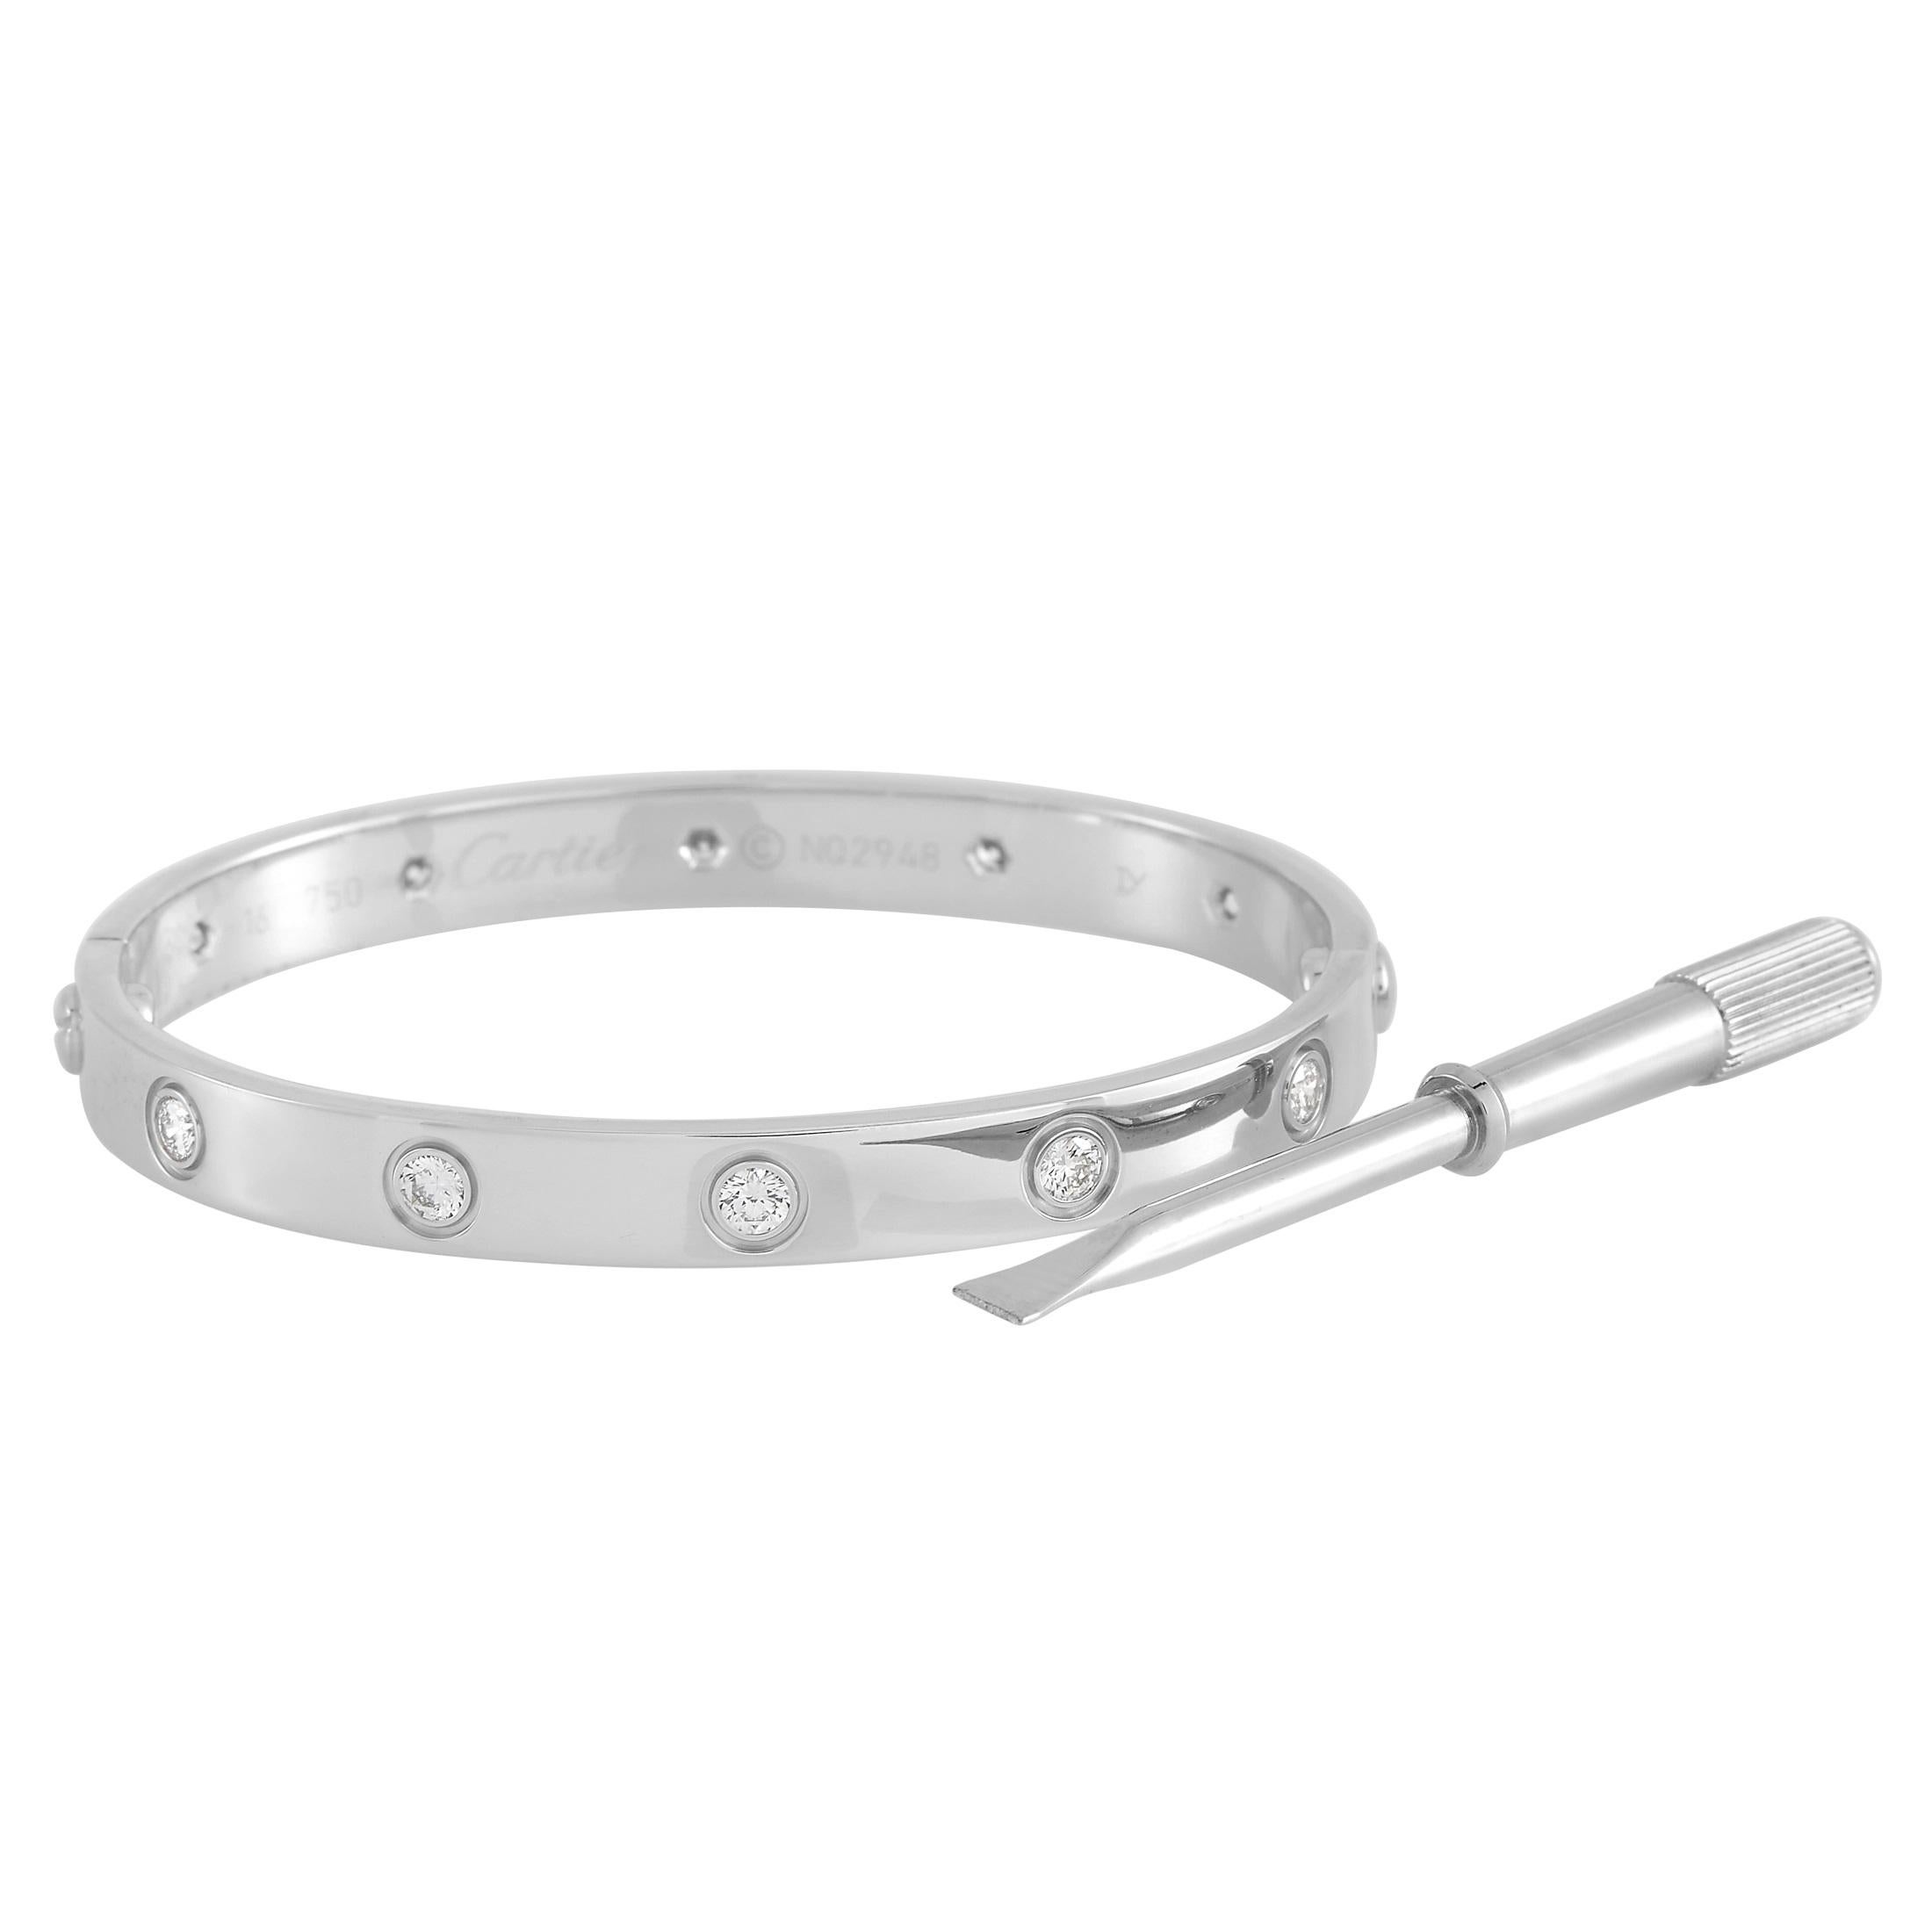 This Cartier Love bracelet proves that even minimalist pieces can make a statement. Encircling the iconic 18K White Gold bangle-style bracelet, you’ll find 10 glittering round-cut diamonds. A size 16, this piece measures 6.3” long and includes the